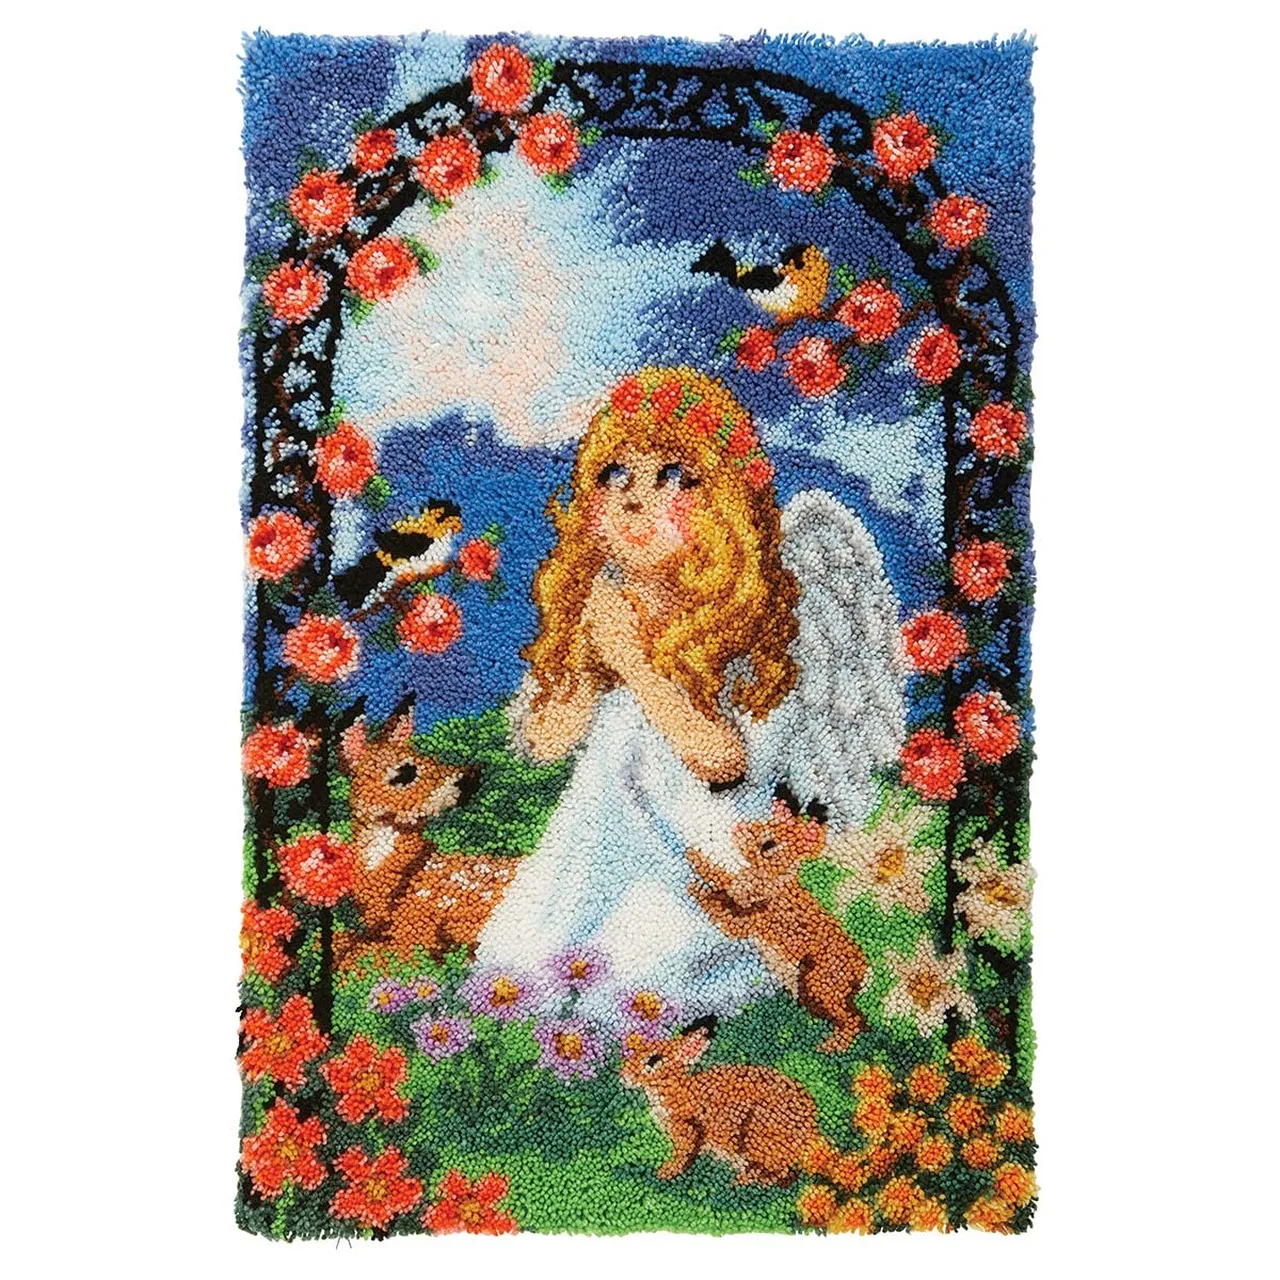 

Latch Hook Kits Garden Angel Wall Hanging DIY Carpet Rug Pre-Printed Canvas with Non-Skid Backing Floor Mat 69x102cm